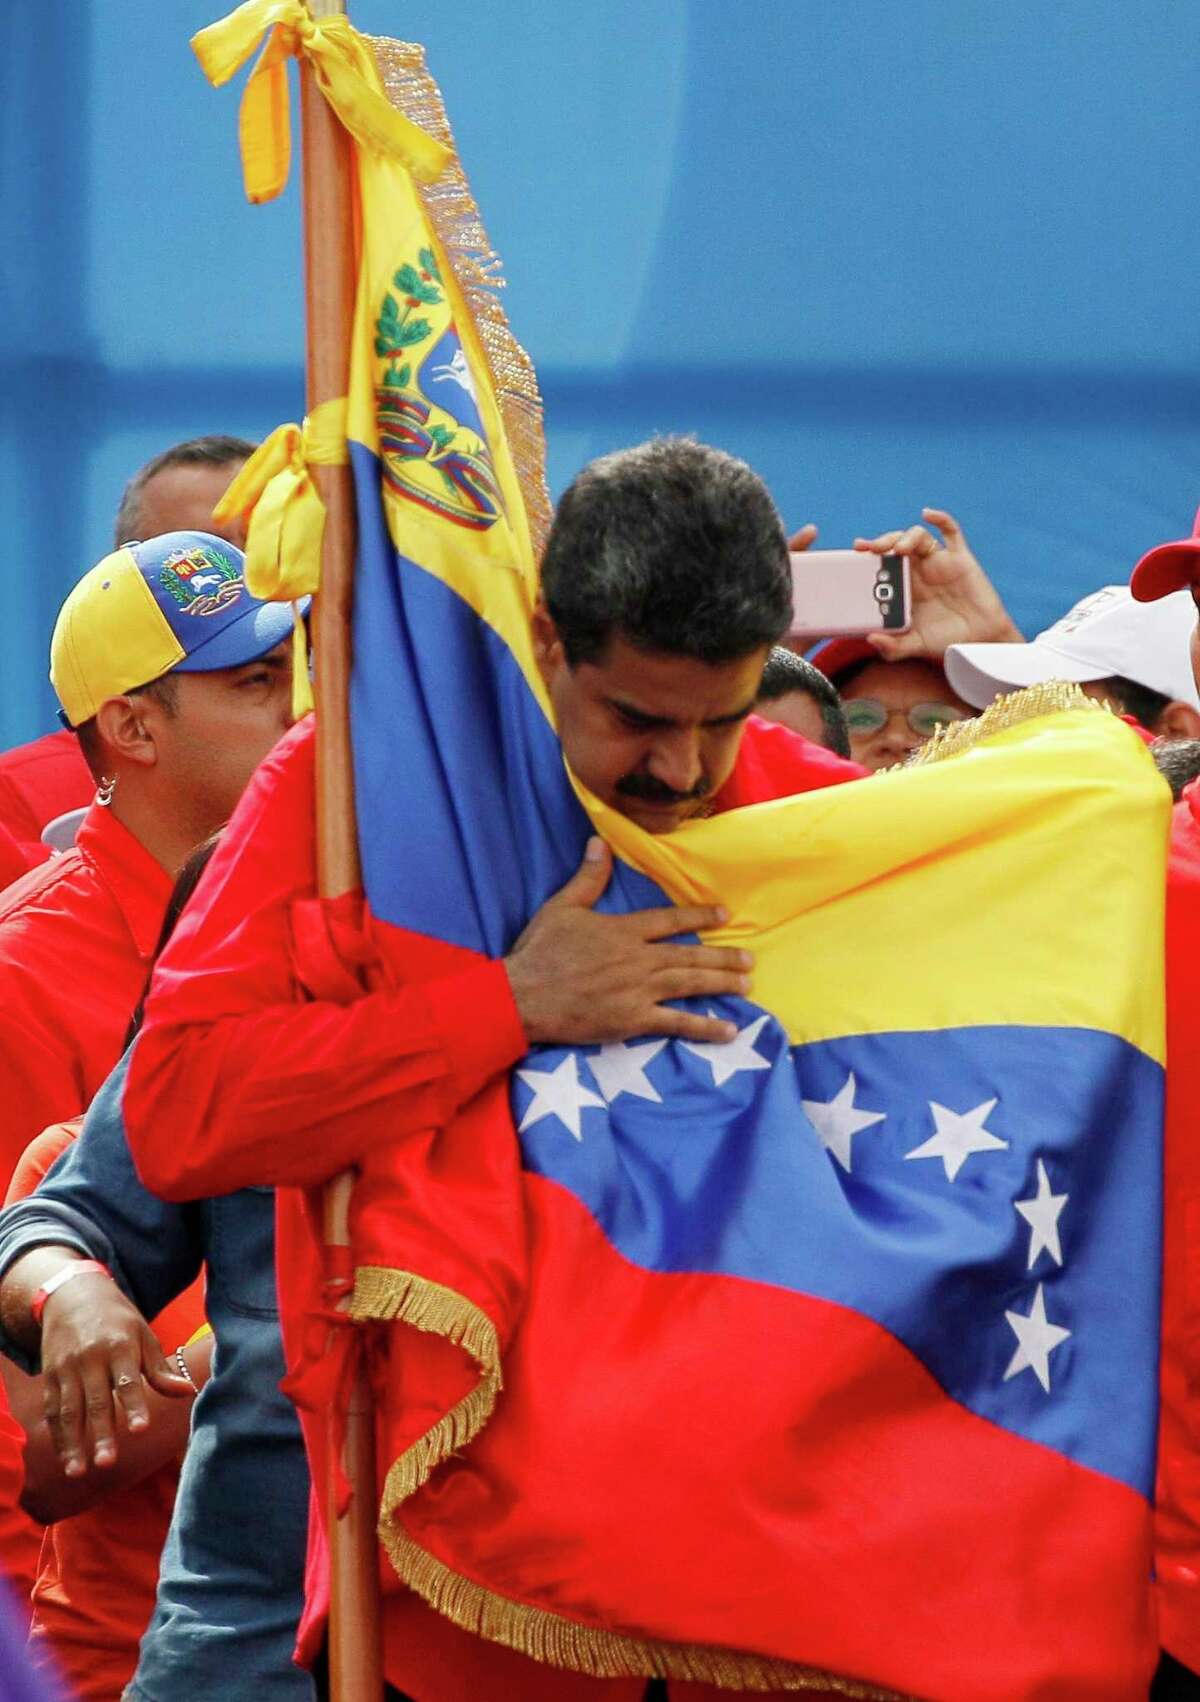 Venezuela's President Nicolas Maduro holds the country's national flag during a rally in Caracas, Venezuela, Thursday, July 27, 2017. President Maduro has provoked international outcry and enraged an opposition demanding his resignation with his push to elect an assembly that will rewrite the troubled South American nation's constitution. Sunday's election will cap nearly four months of political upheaval that has left thousands detained and injured and at least 100 dead. (AP Photo/Ariana Cubillos)